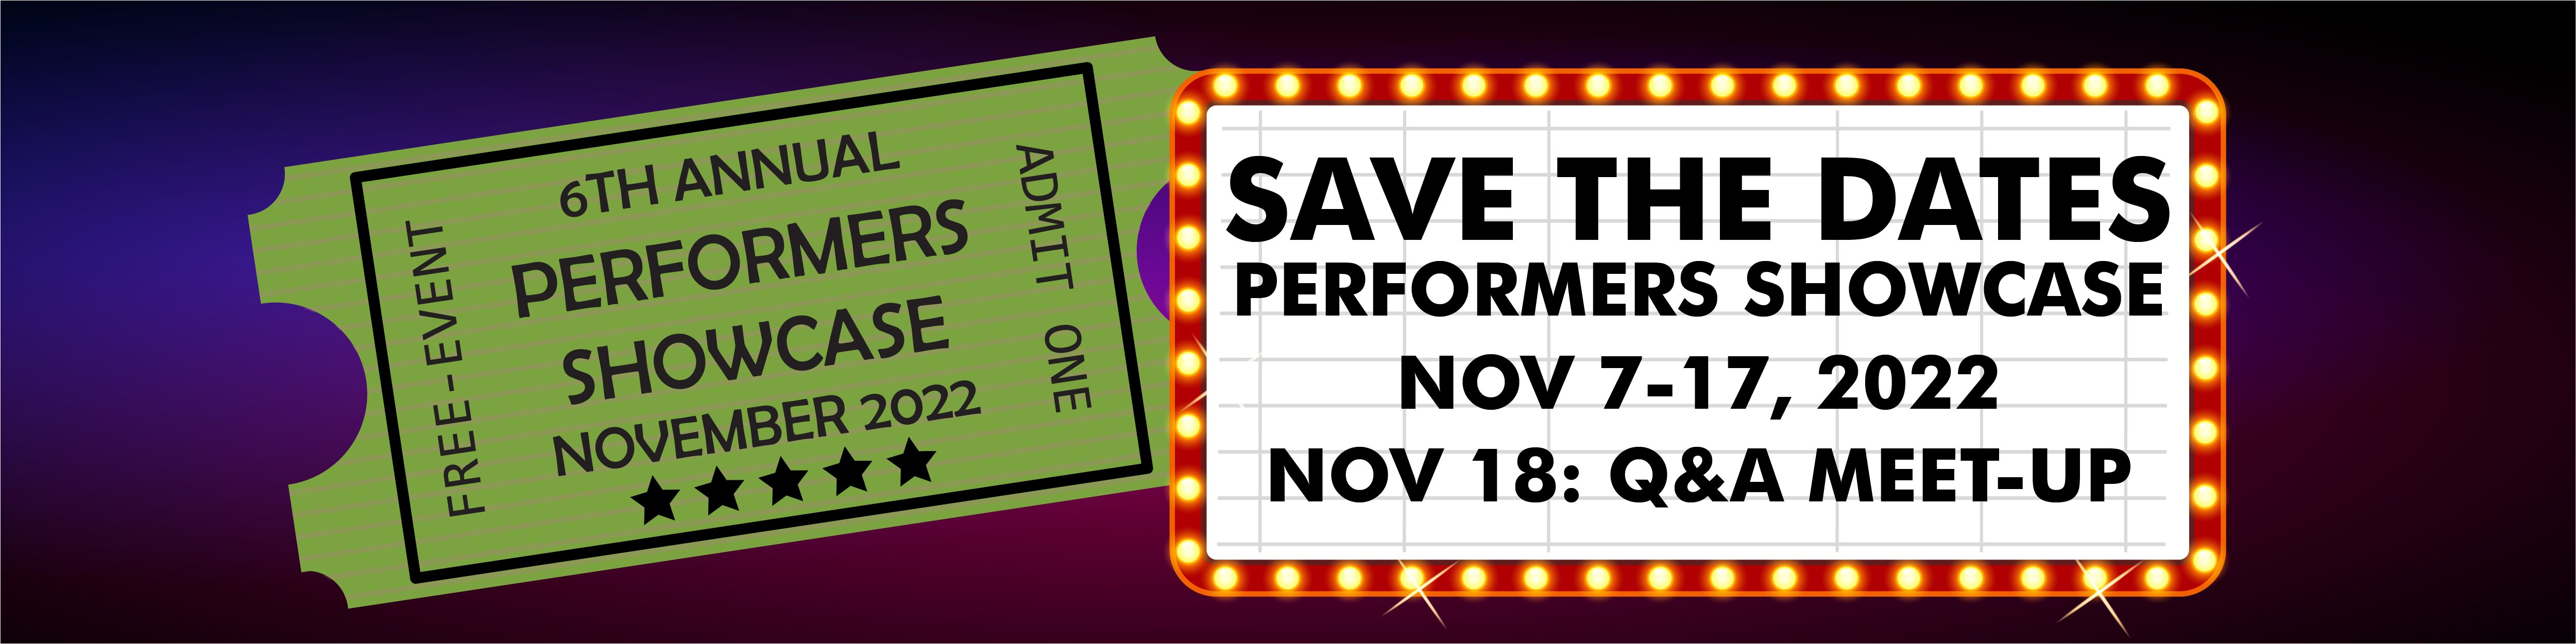 showcase marquee lighted sign for 6th annual performers showcase with ticket. November 2022